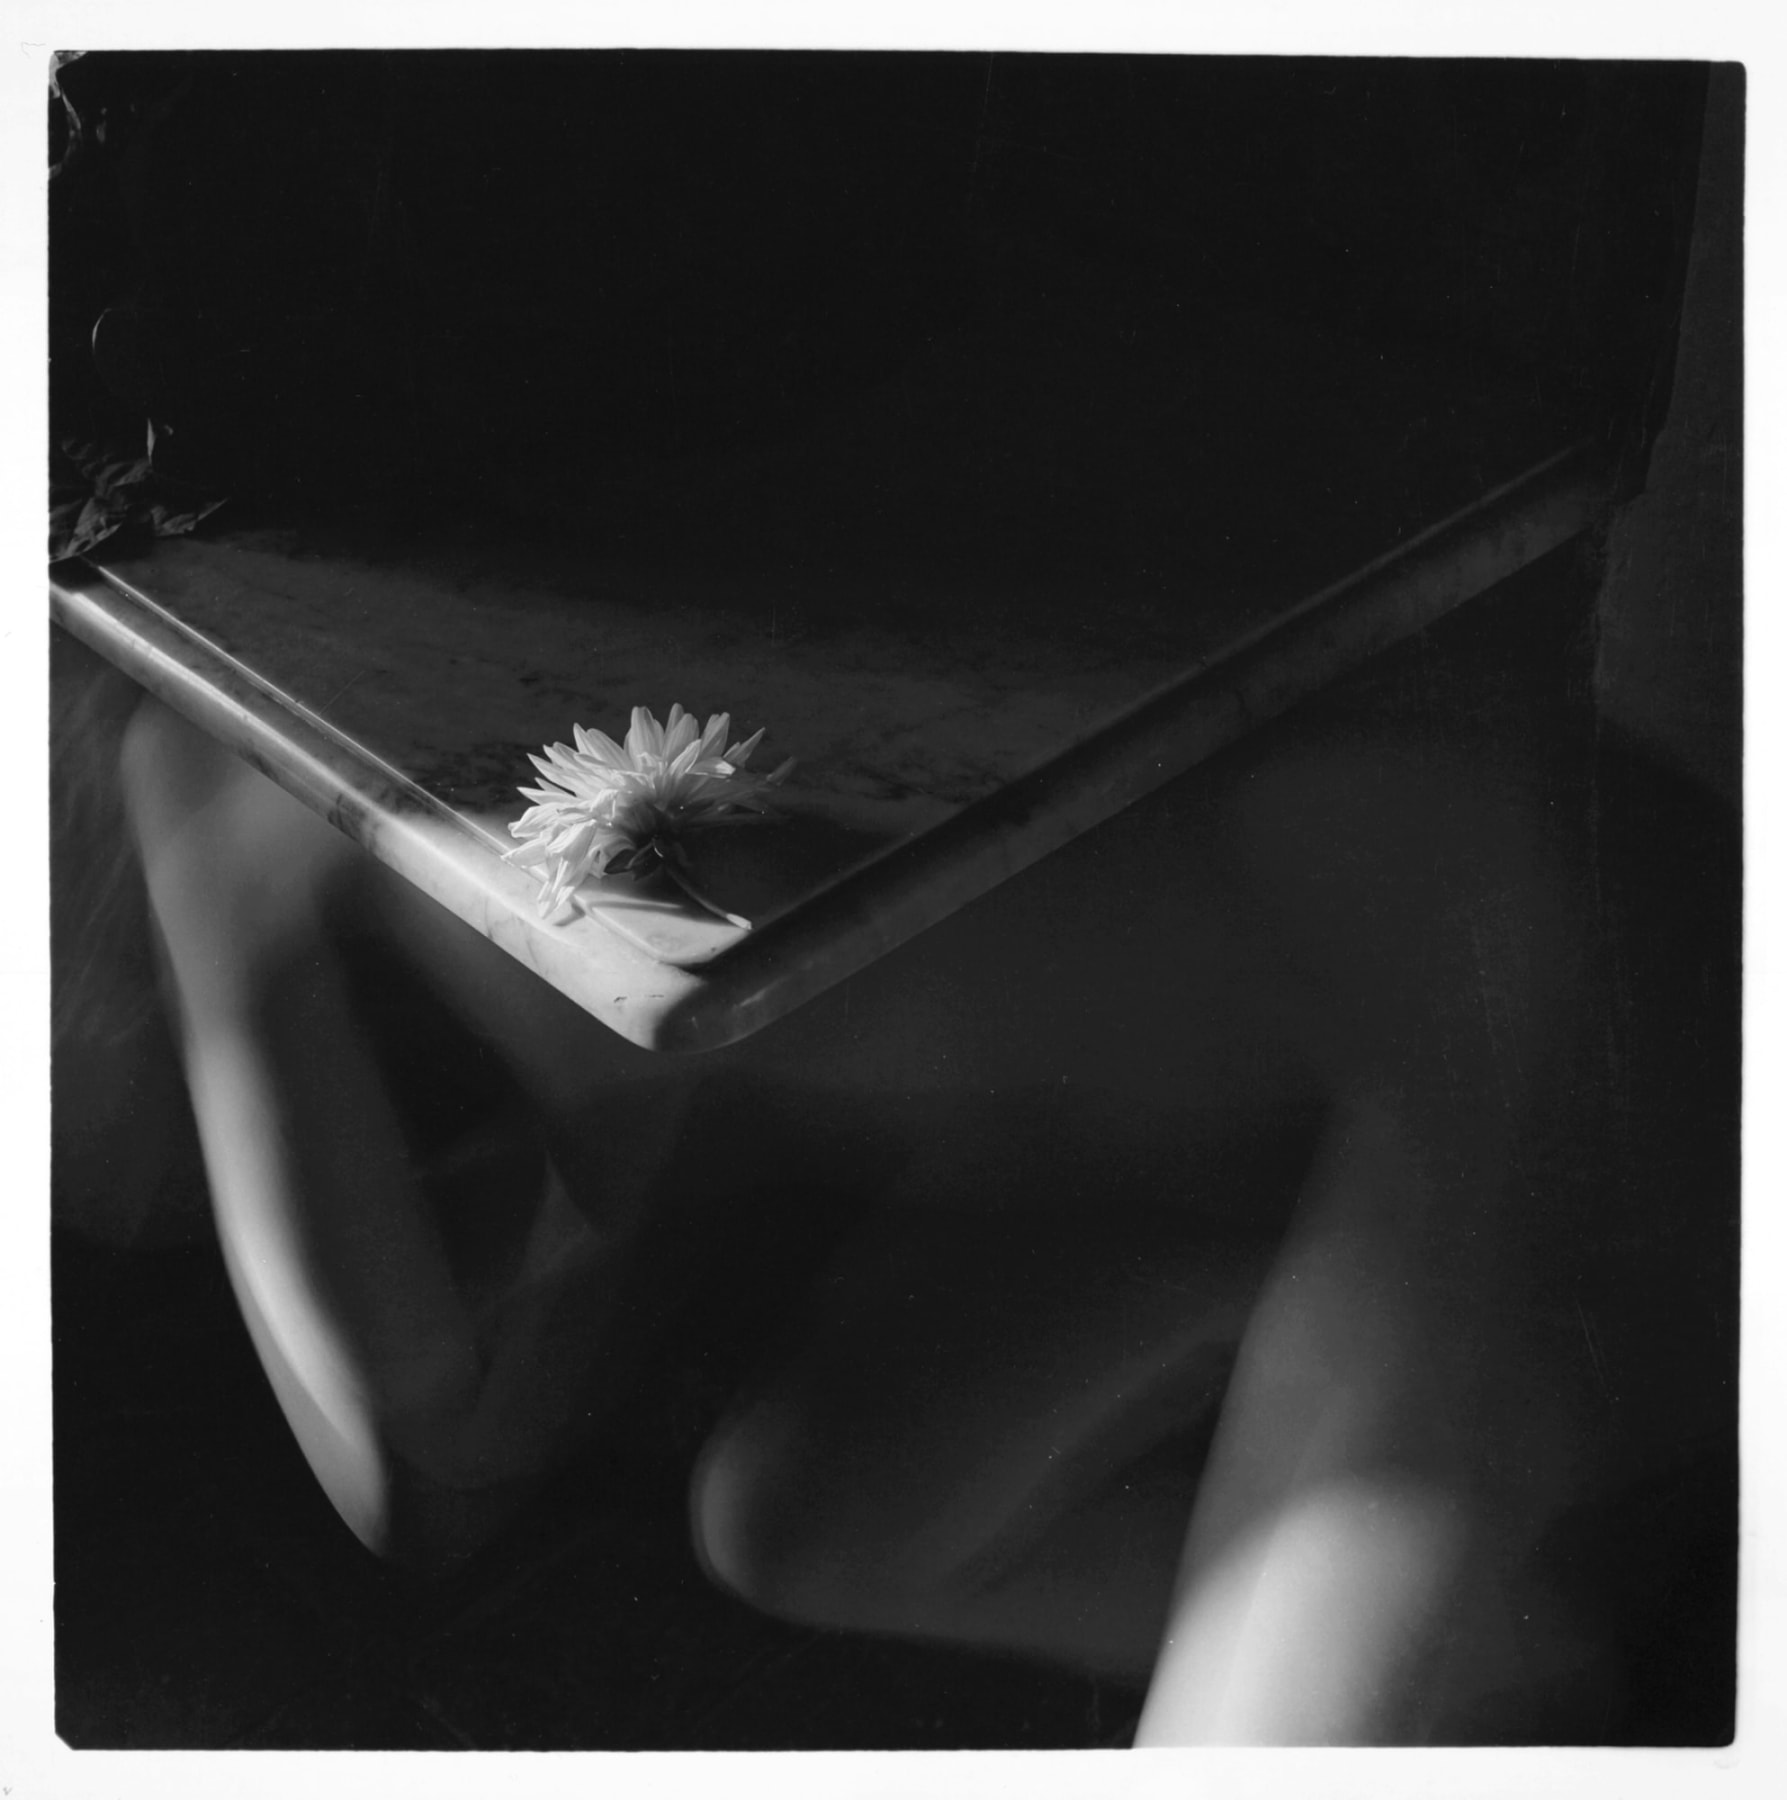 Black and white photograph of a single flower on the corner of a marble table, with a nude figure below the table. 